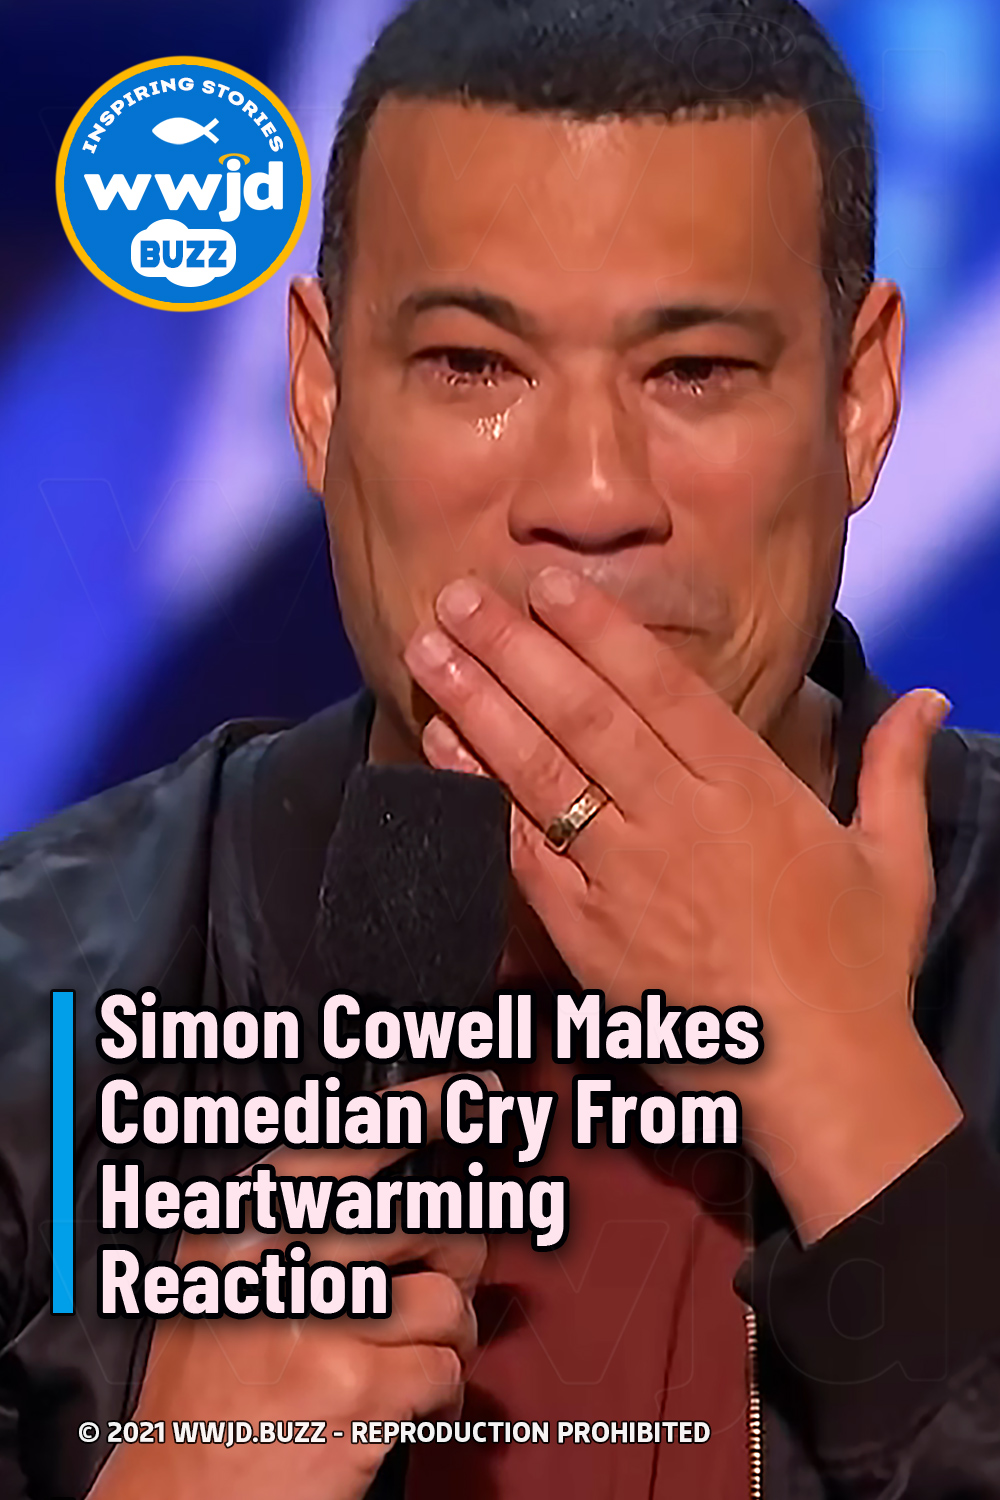 Simon Cowell Makes Comedian Cry From Heartwarming Reaction